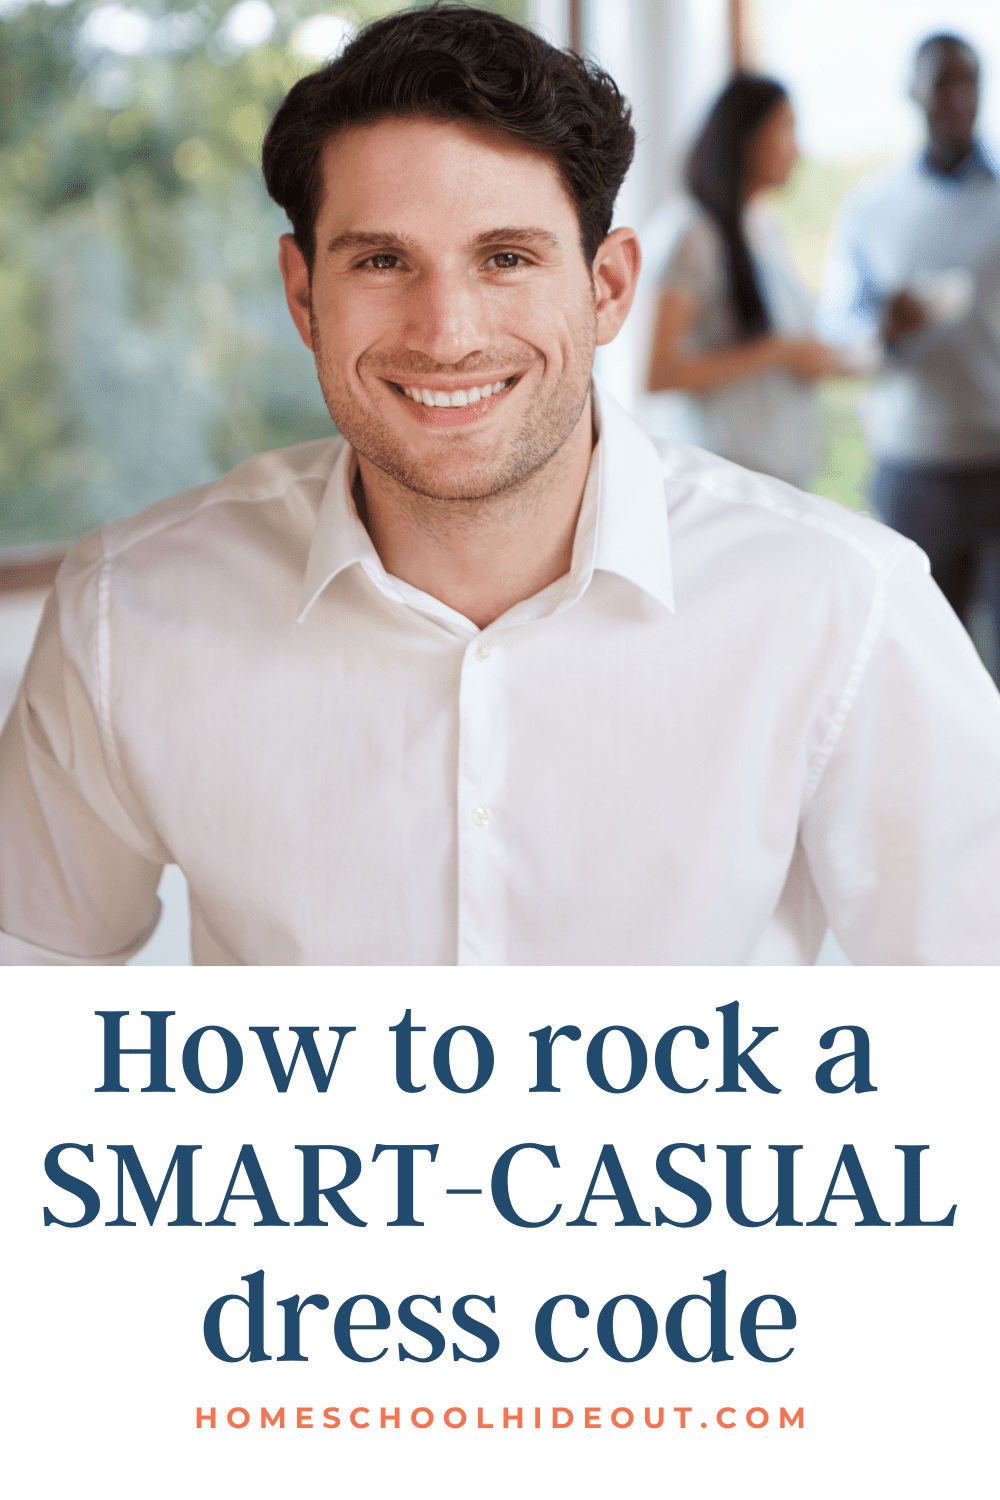 A smart-casual dress code had me stumped but these tips made building my wardrobe a breeze!